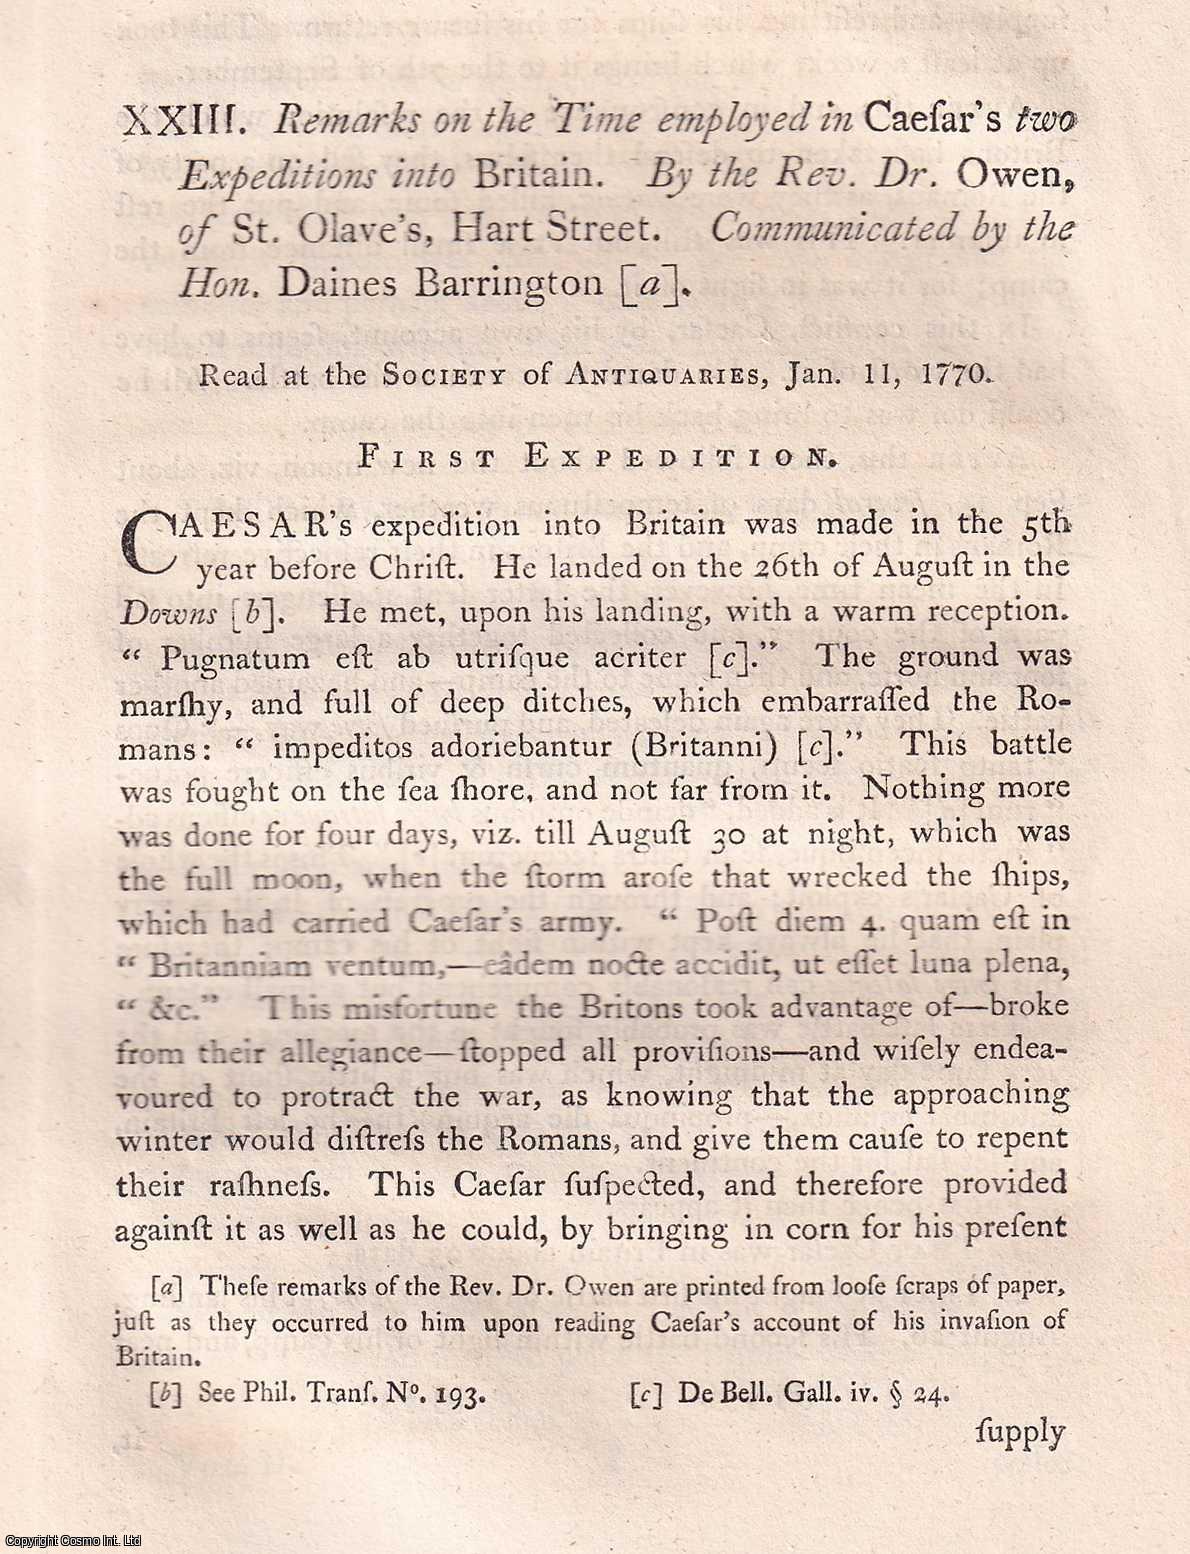 Rev. Dr. Owen - Remarks on the Time employed in Caesar's two Expeditions into Britain. An uncommon original article from the journal Archaeologia, 1773.